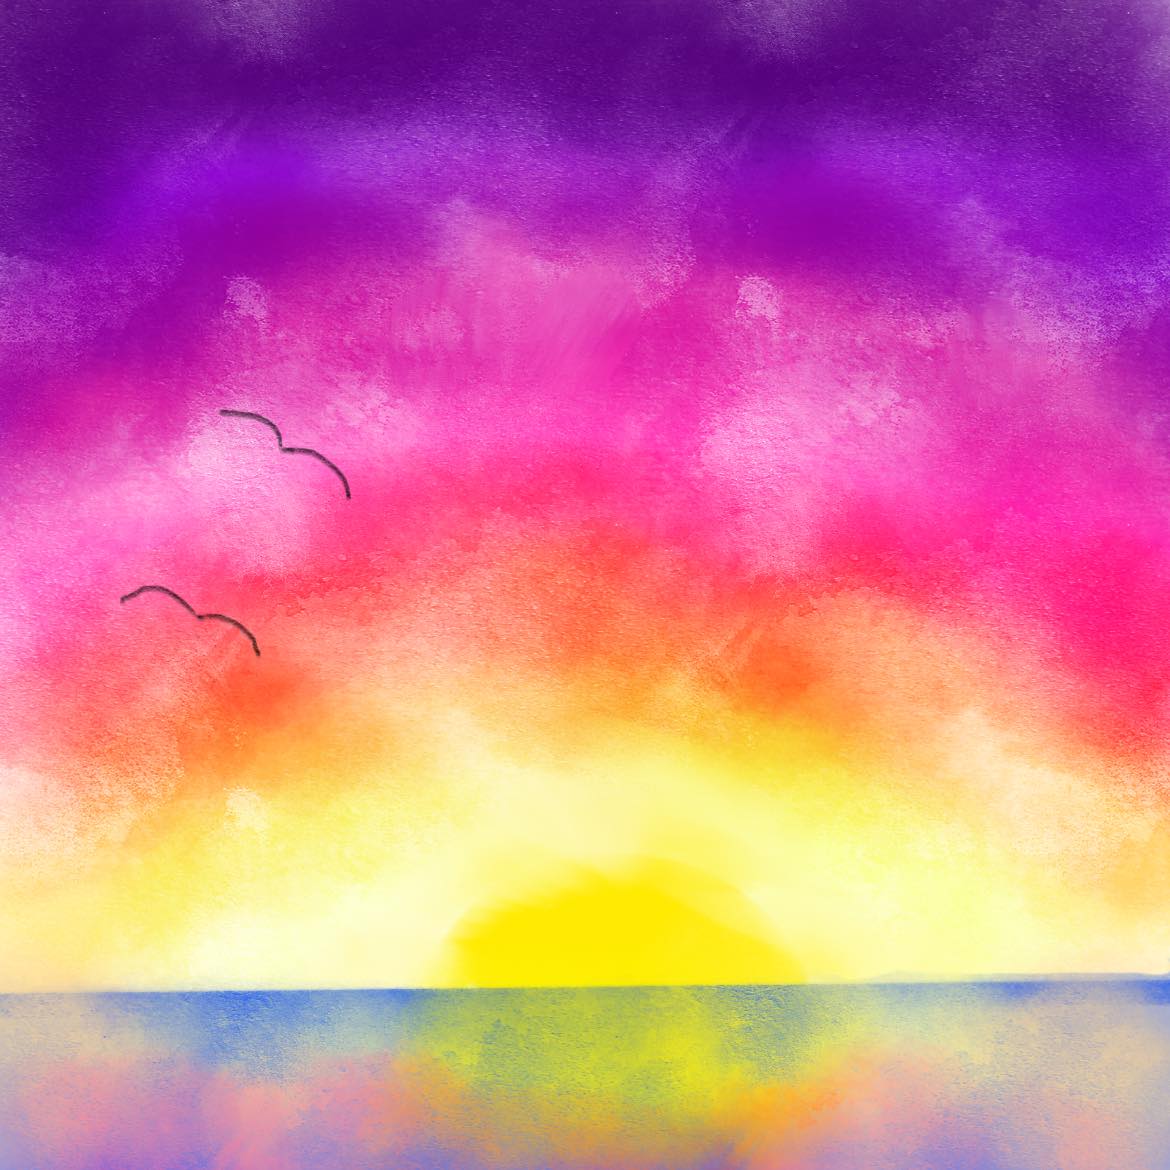 sunset in purples, pinks, and yellows with two birds flying over the ocean